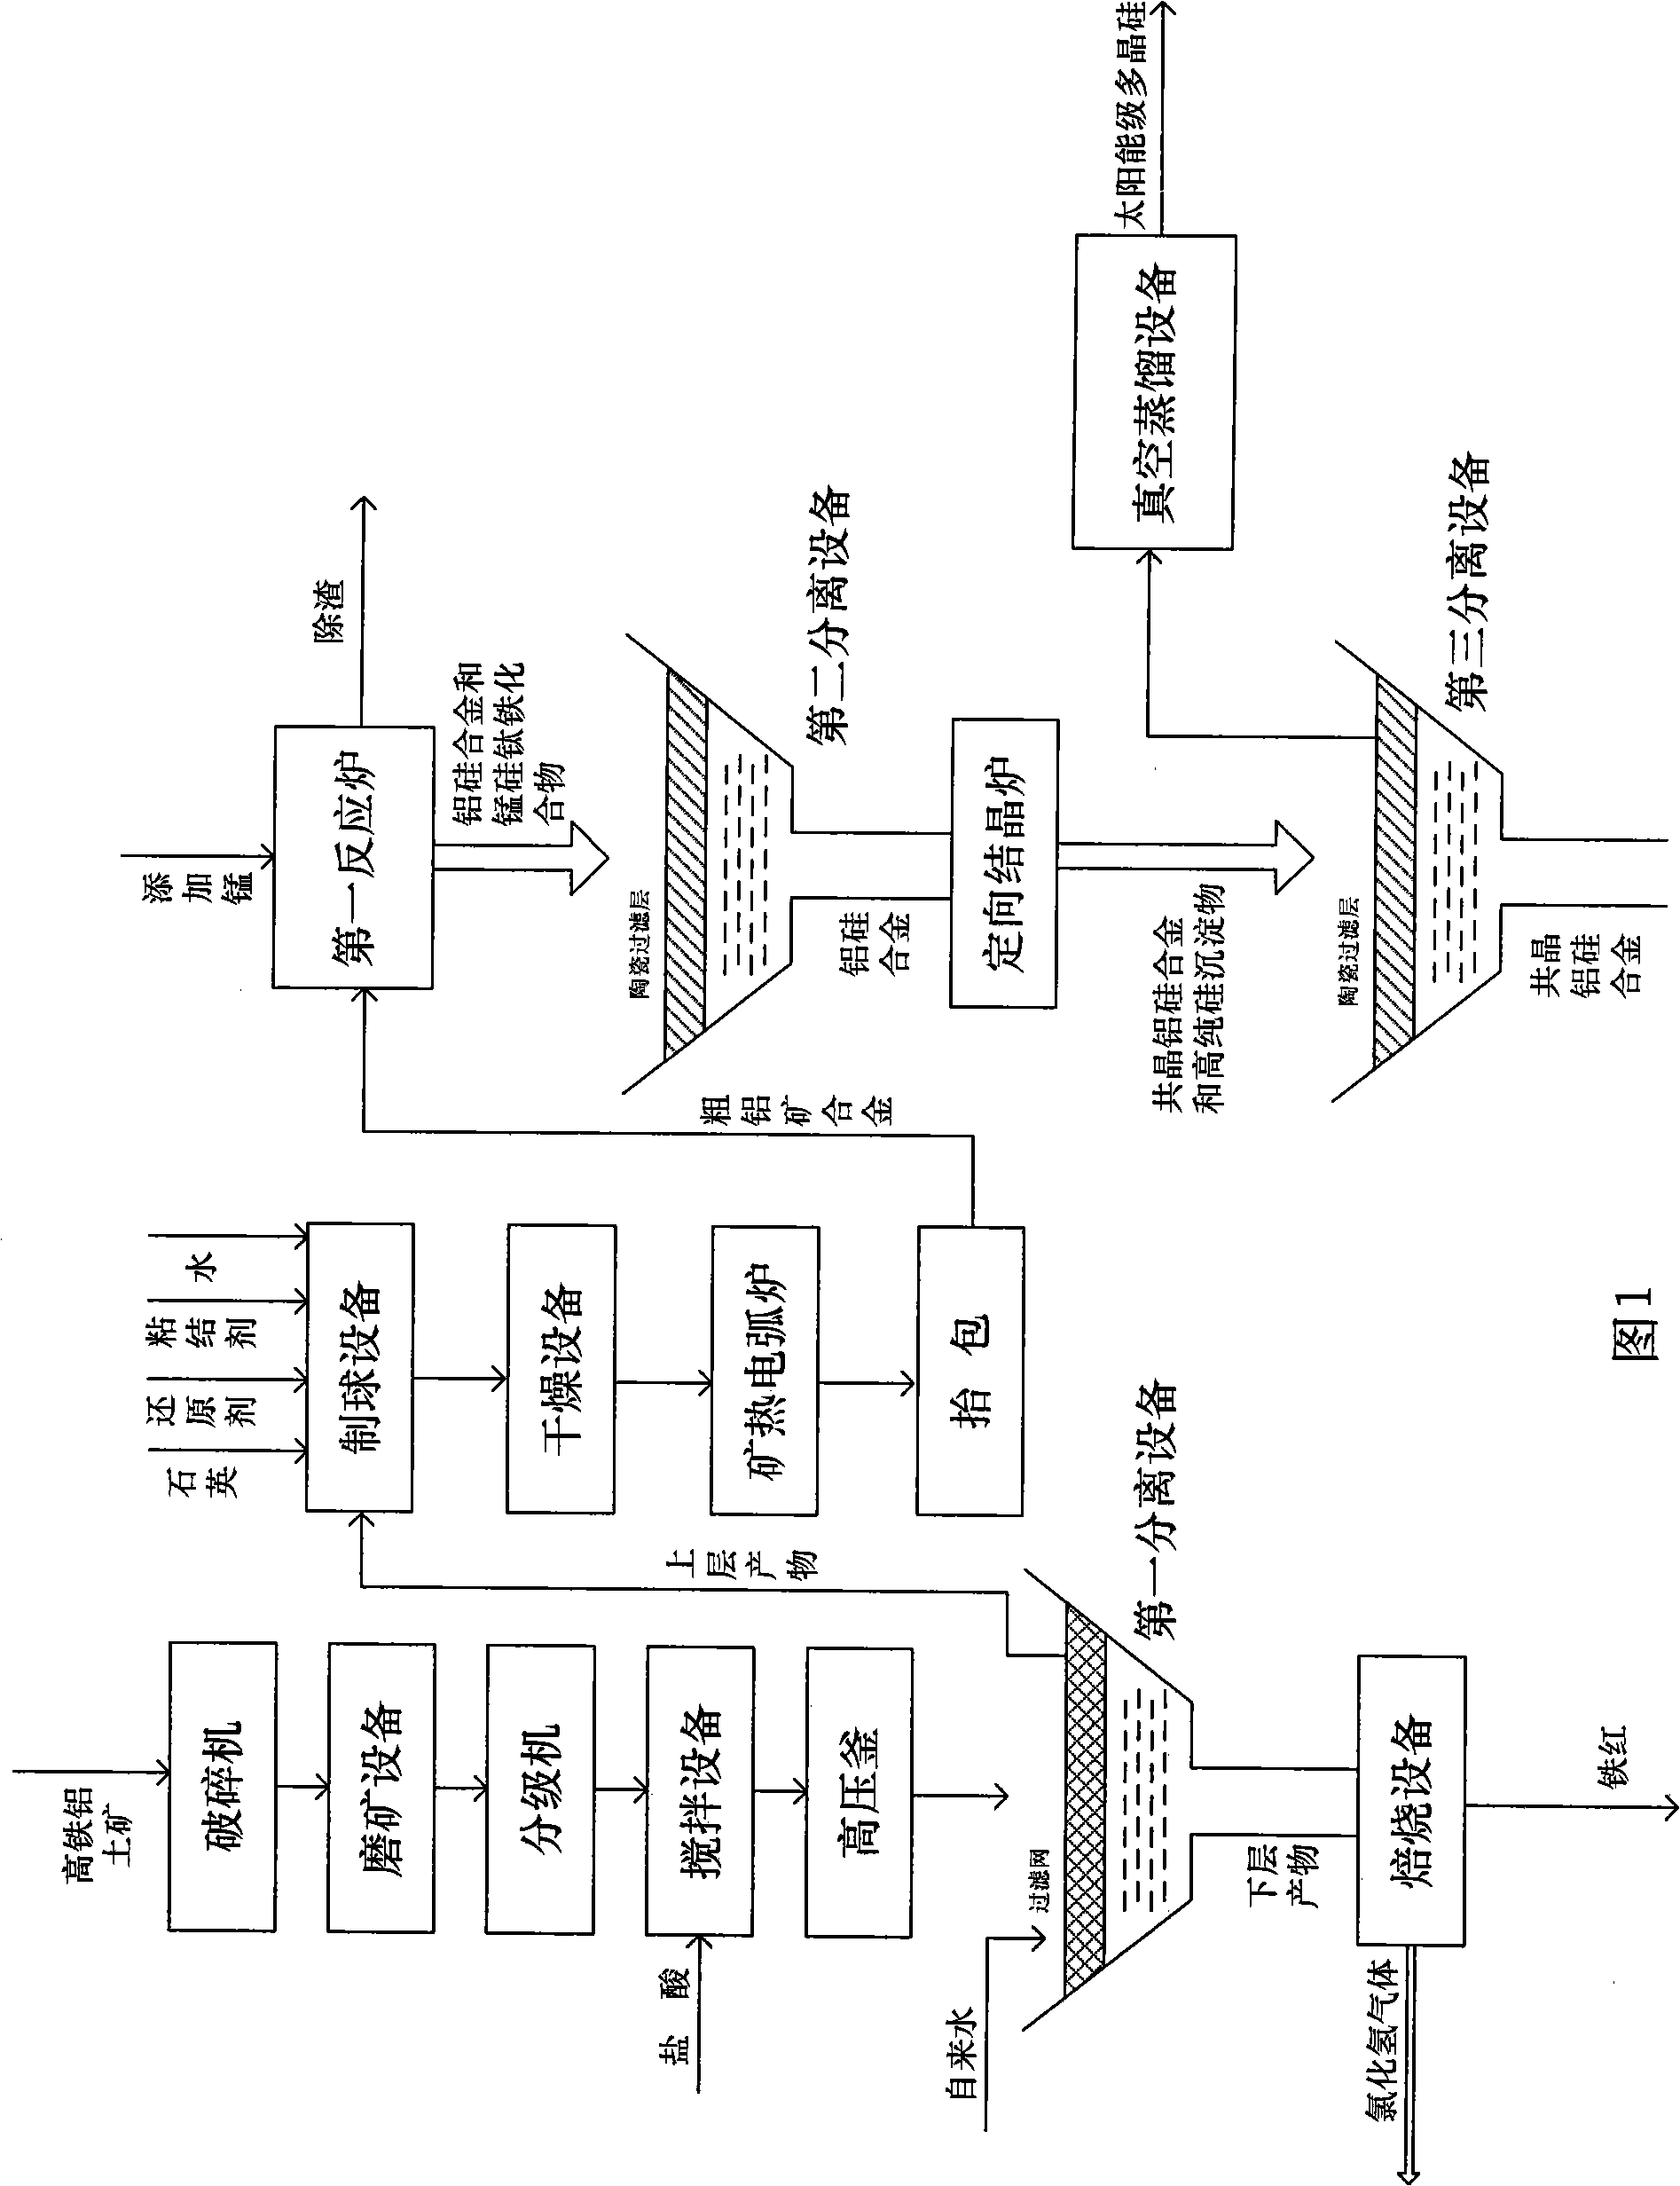 Combination production method for obtaining multi-products using high iron bauxite as raw material